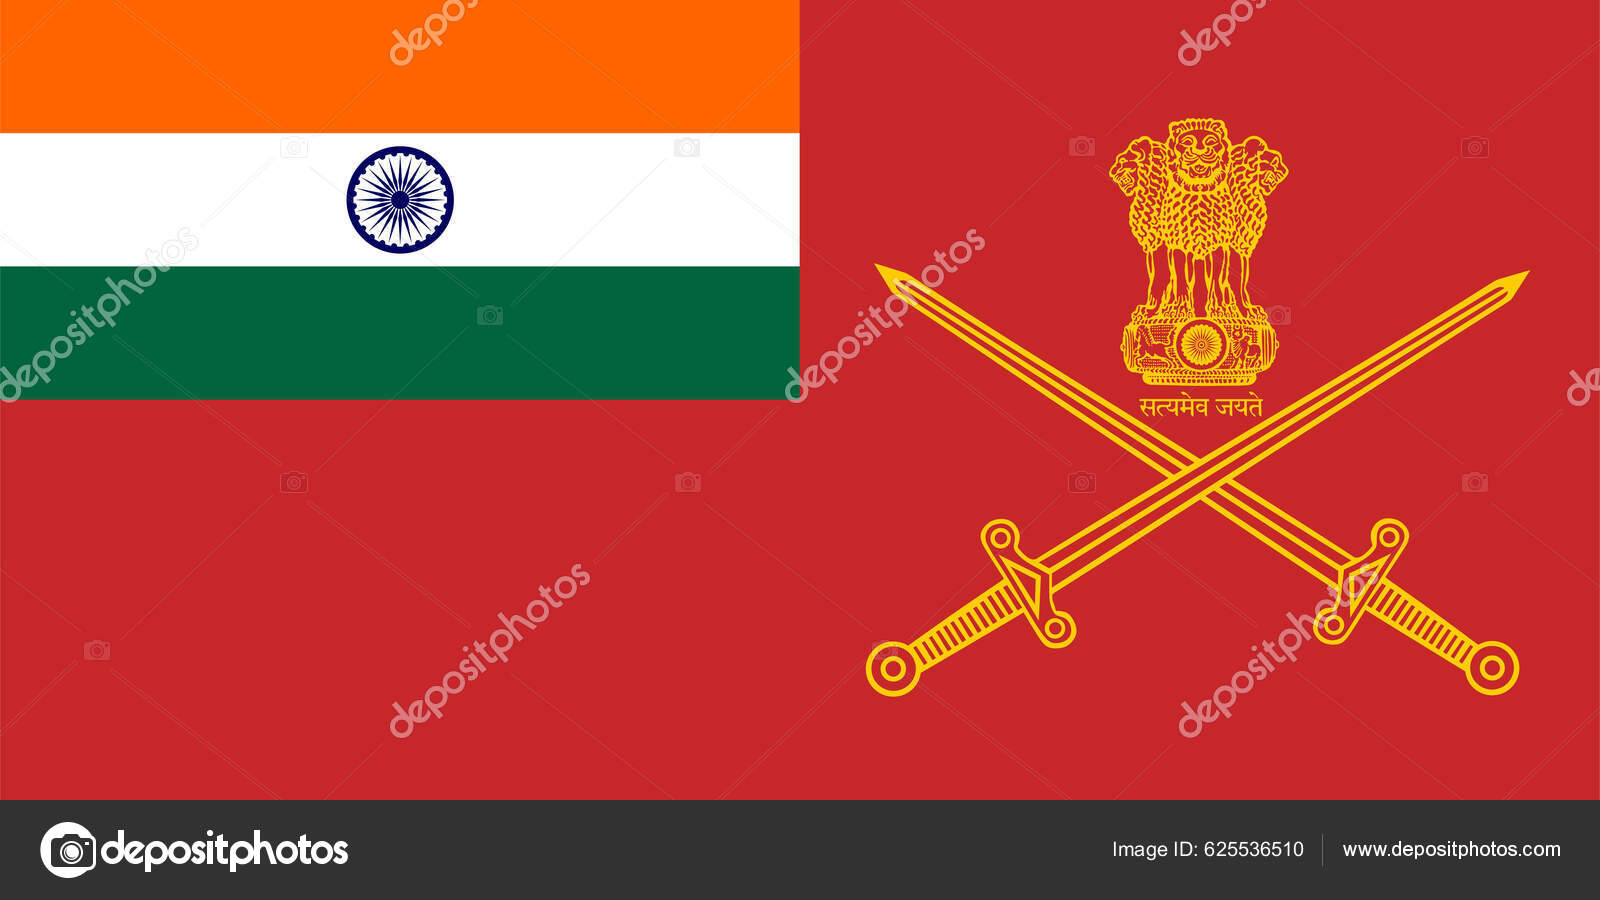 Indian Army Day 2023 Images & Bhartiya Sena Diwas HD Wallpapers for Free  Download Online: WhatsApp Messages, Patriotic Quotes and Greetings To Share  on This Day | 🙏🏻 LatestLY